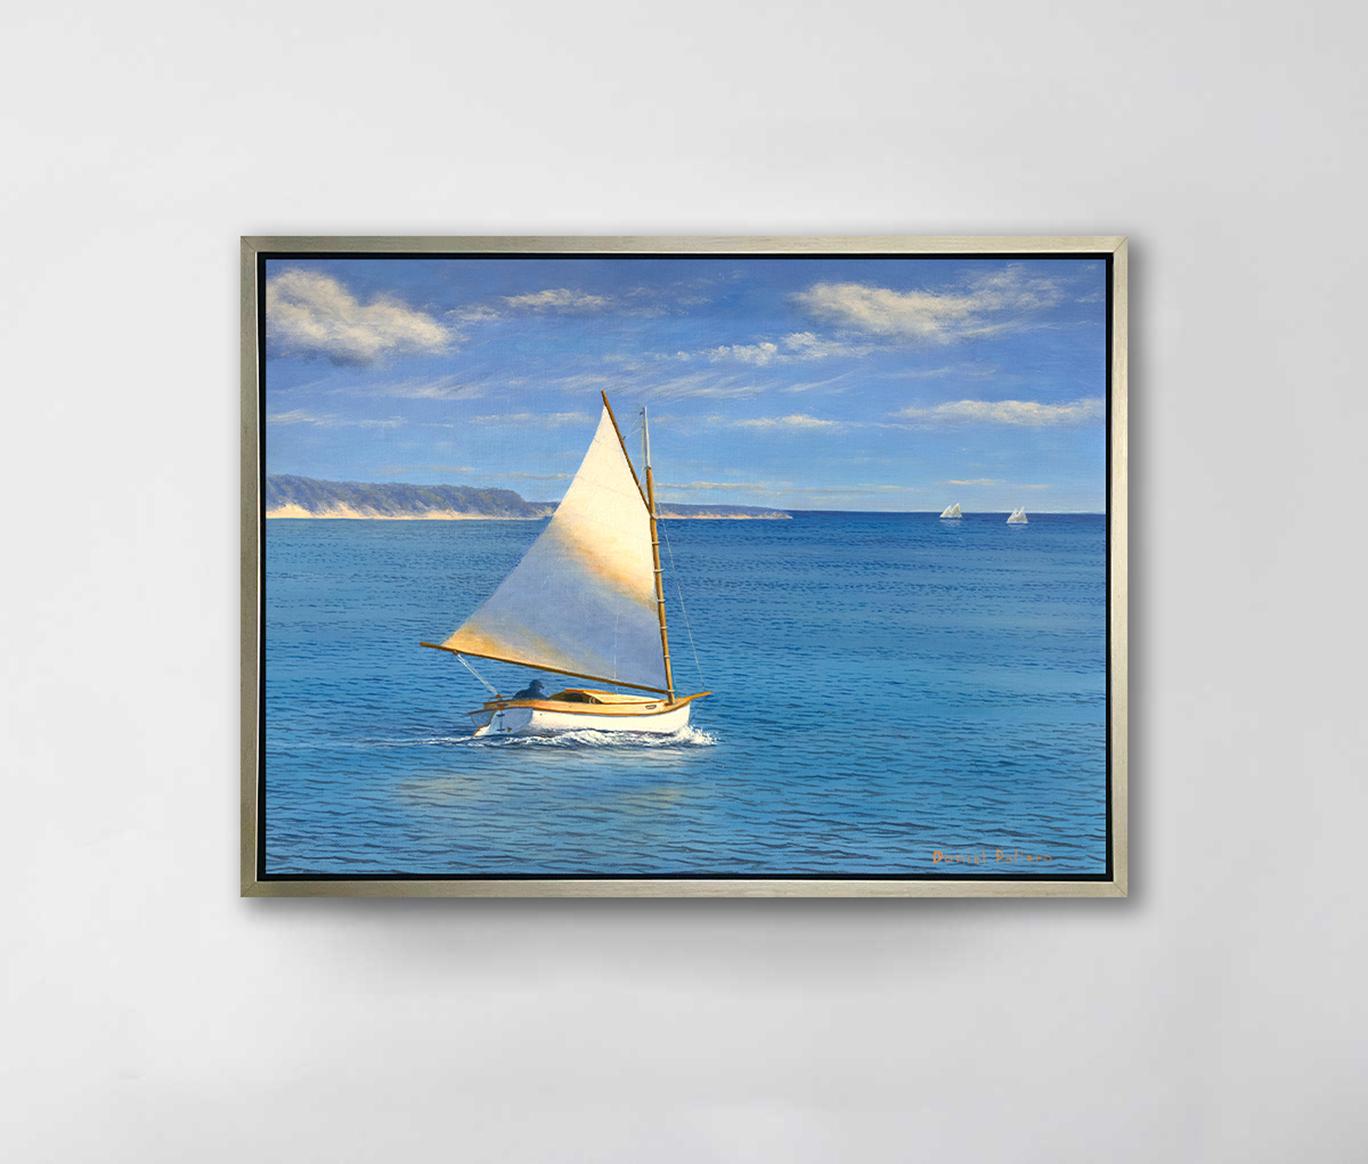 This coastal seascape Limited Edition giclee print by Daniel Pollera is an edition size of 10. Printed on canvas, this giclee ships framed in a warm silver floater frame wired and ready to hang. Other floater frame options are available in gold,